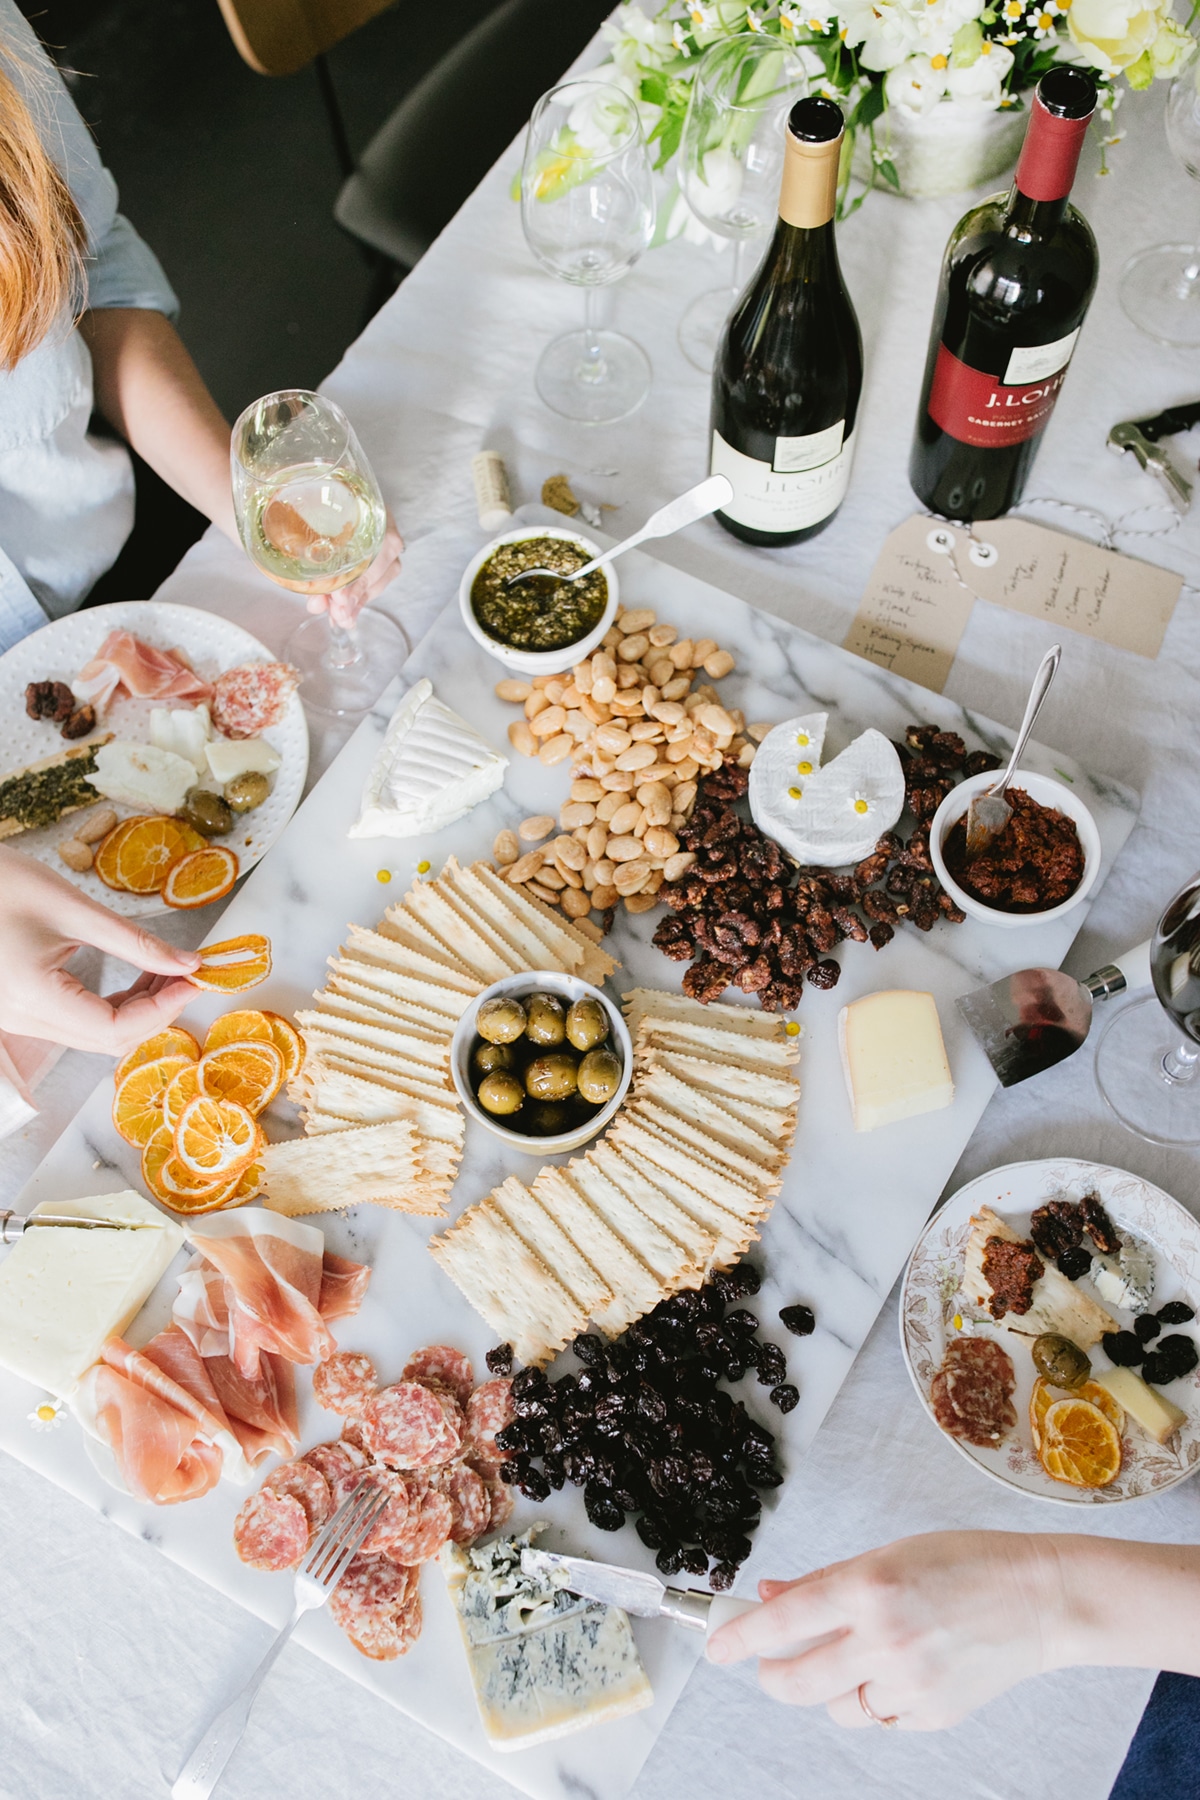 Our Wine & Cheese Board Pairing Guide for White & Red